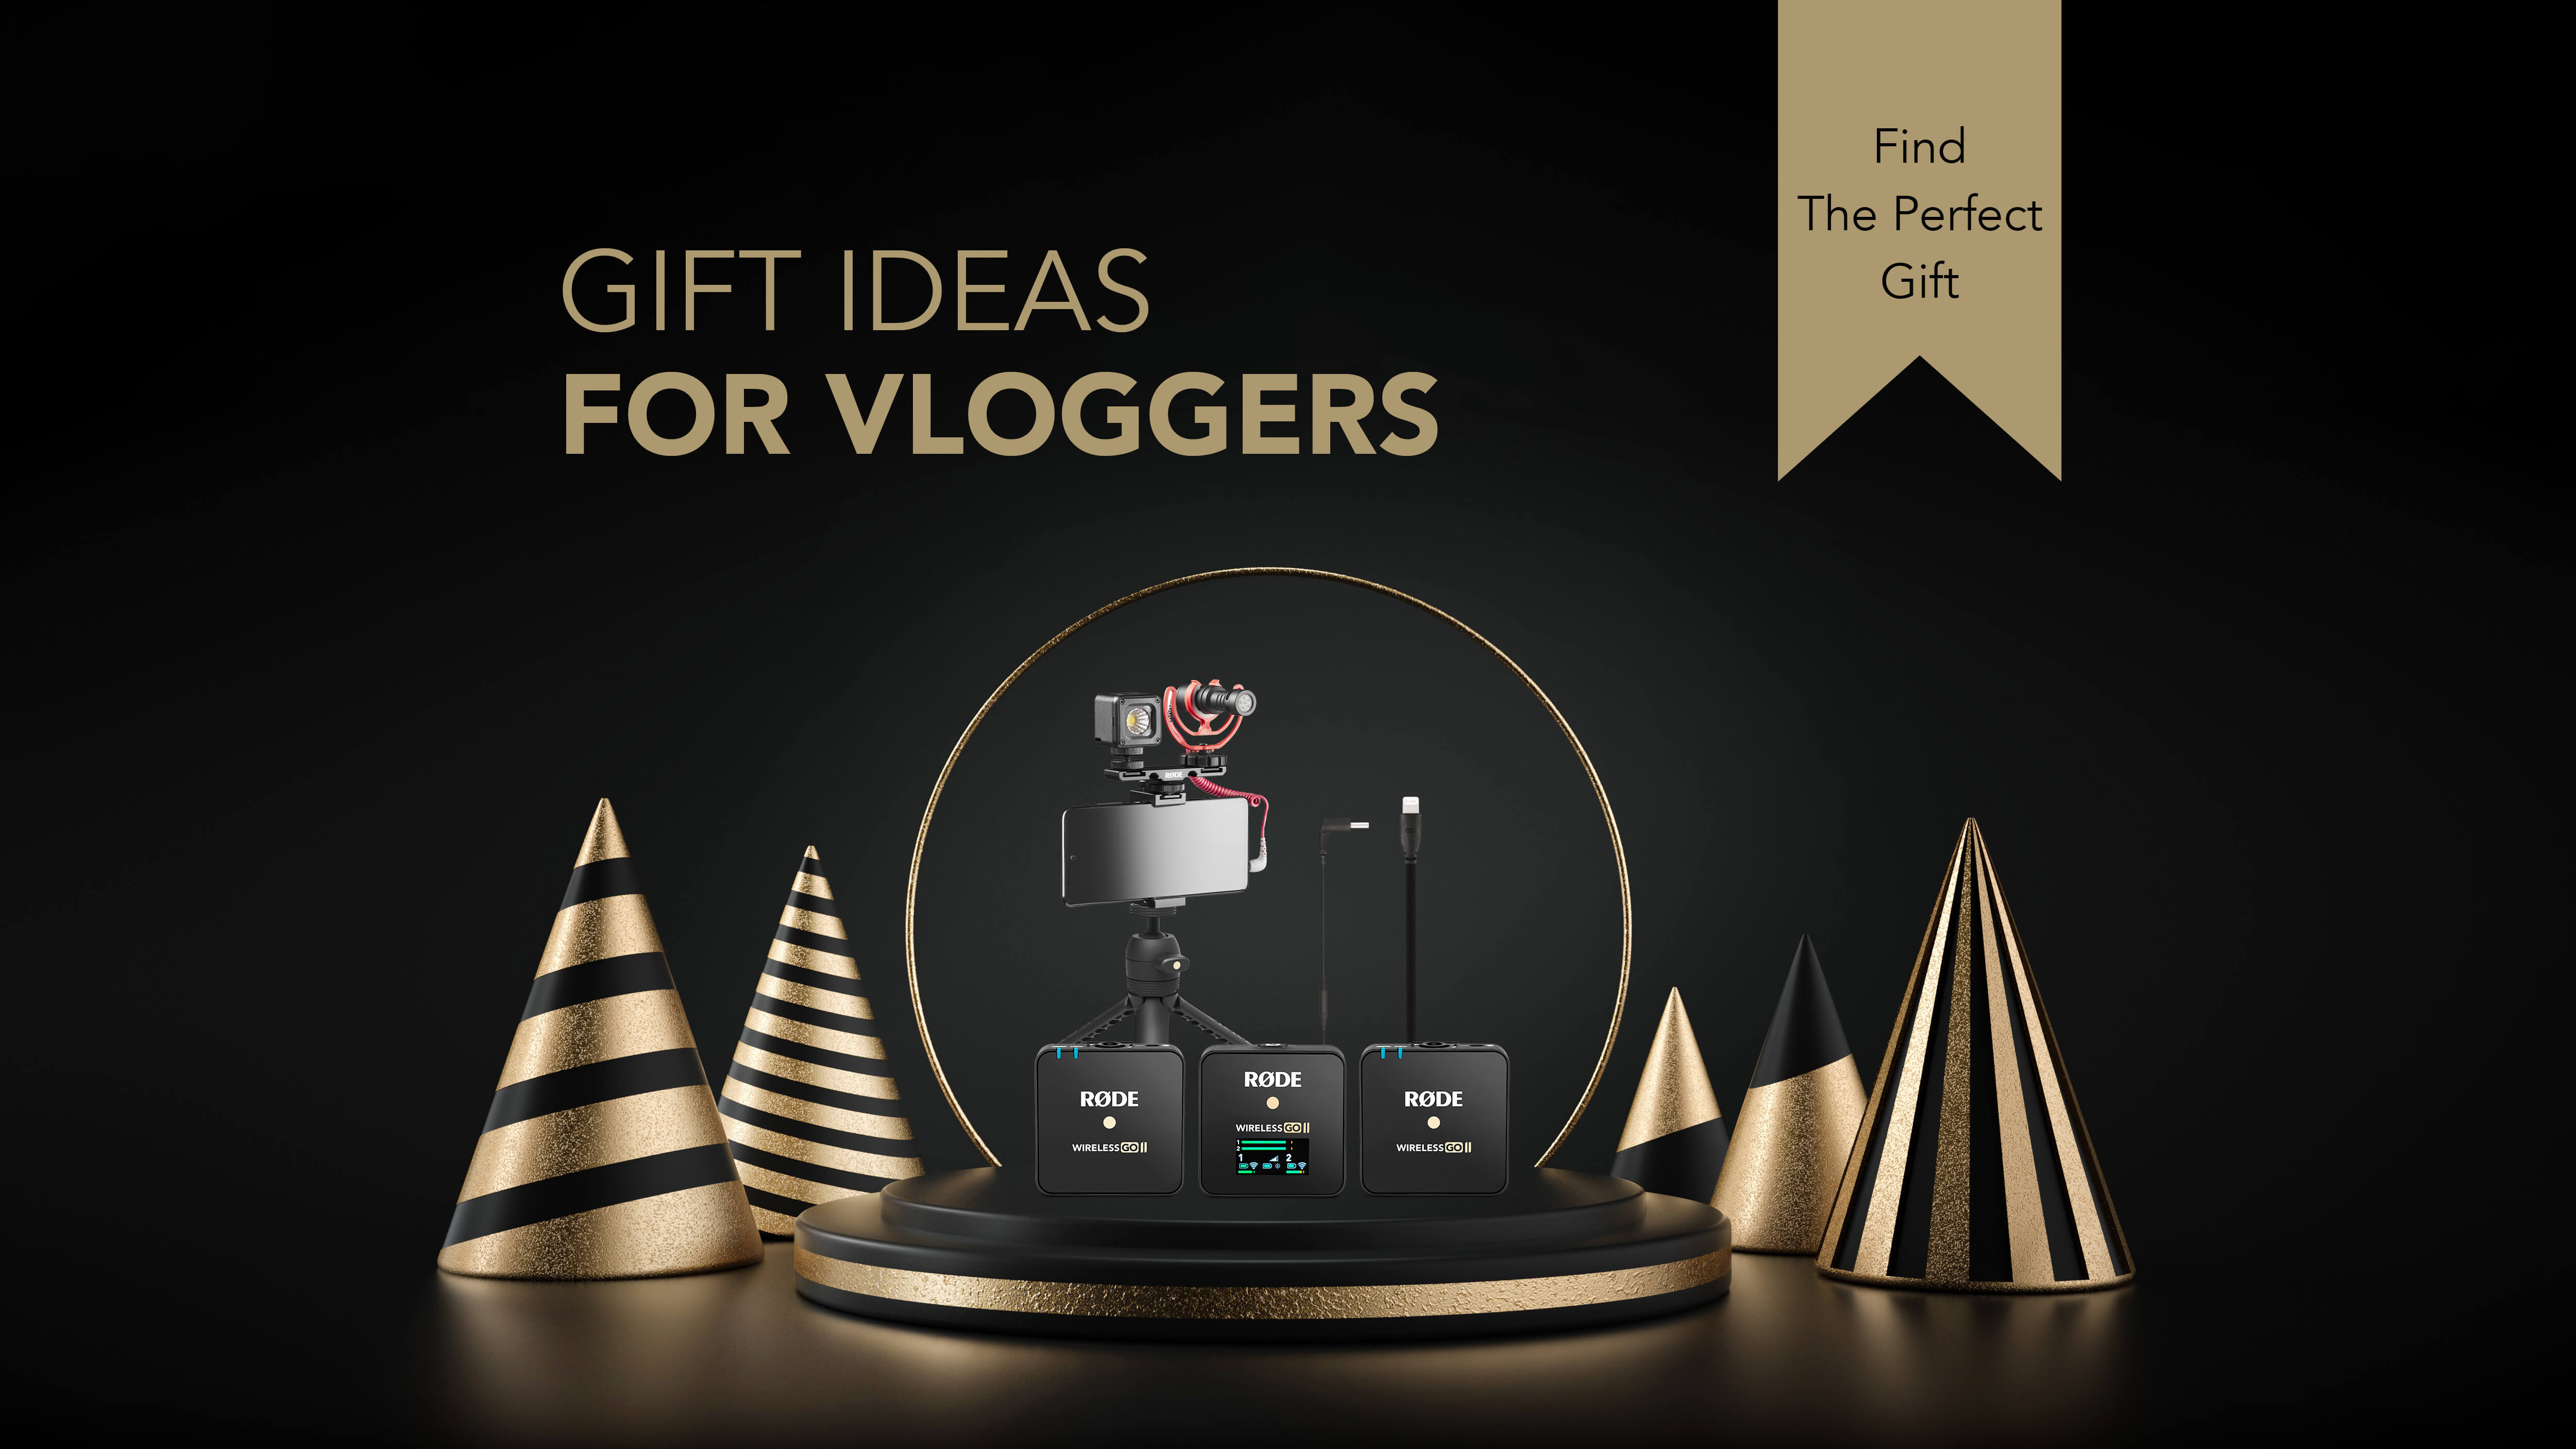 Wireless GO II, Vlogger Kits, SC15 or SC16 Gift Ideas For Vloggers